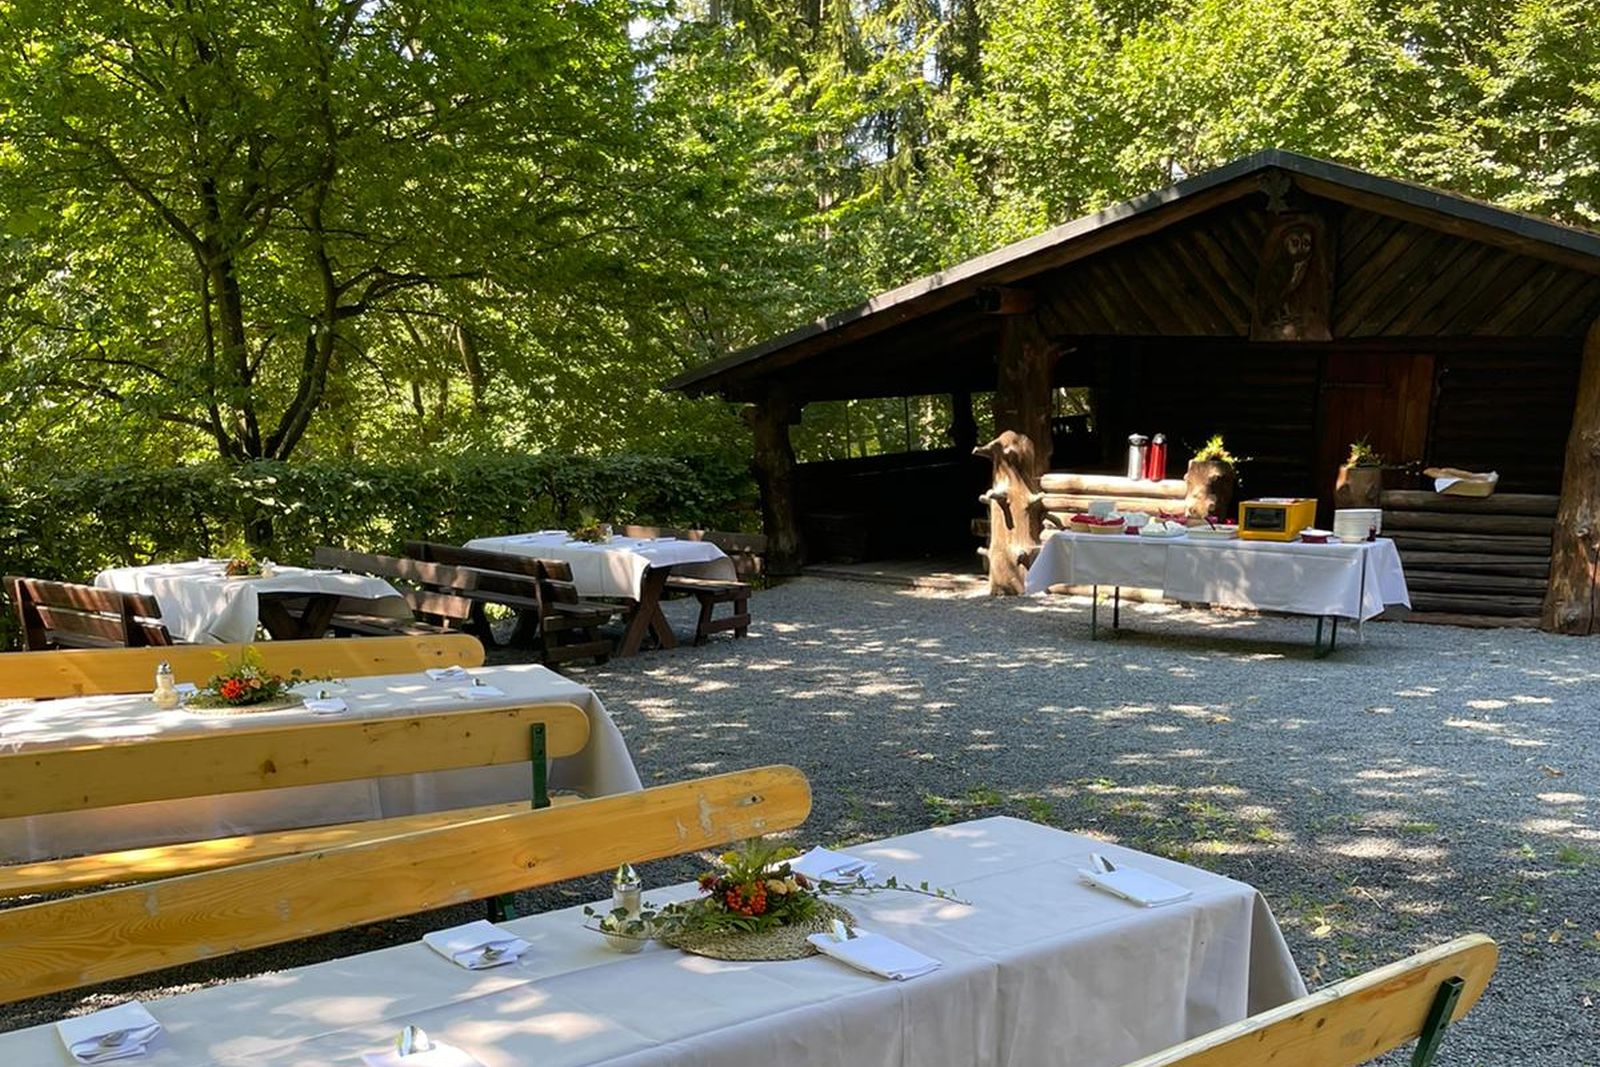 Shelter in the forest with four benches and food buffet